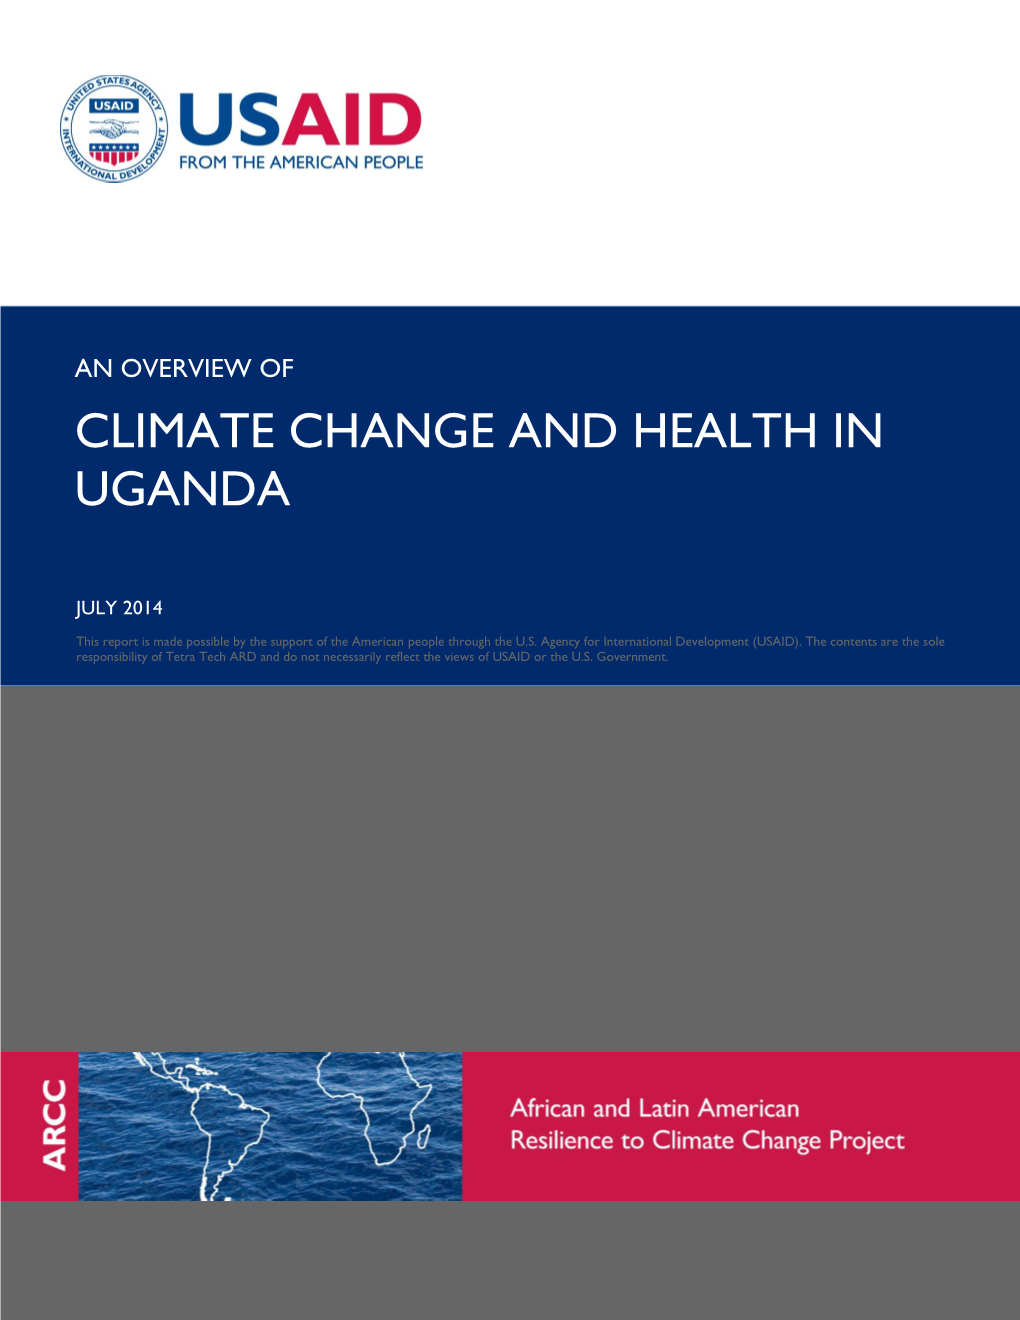 Climate Change and Health in Uganda